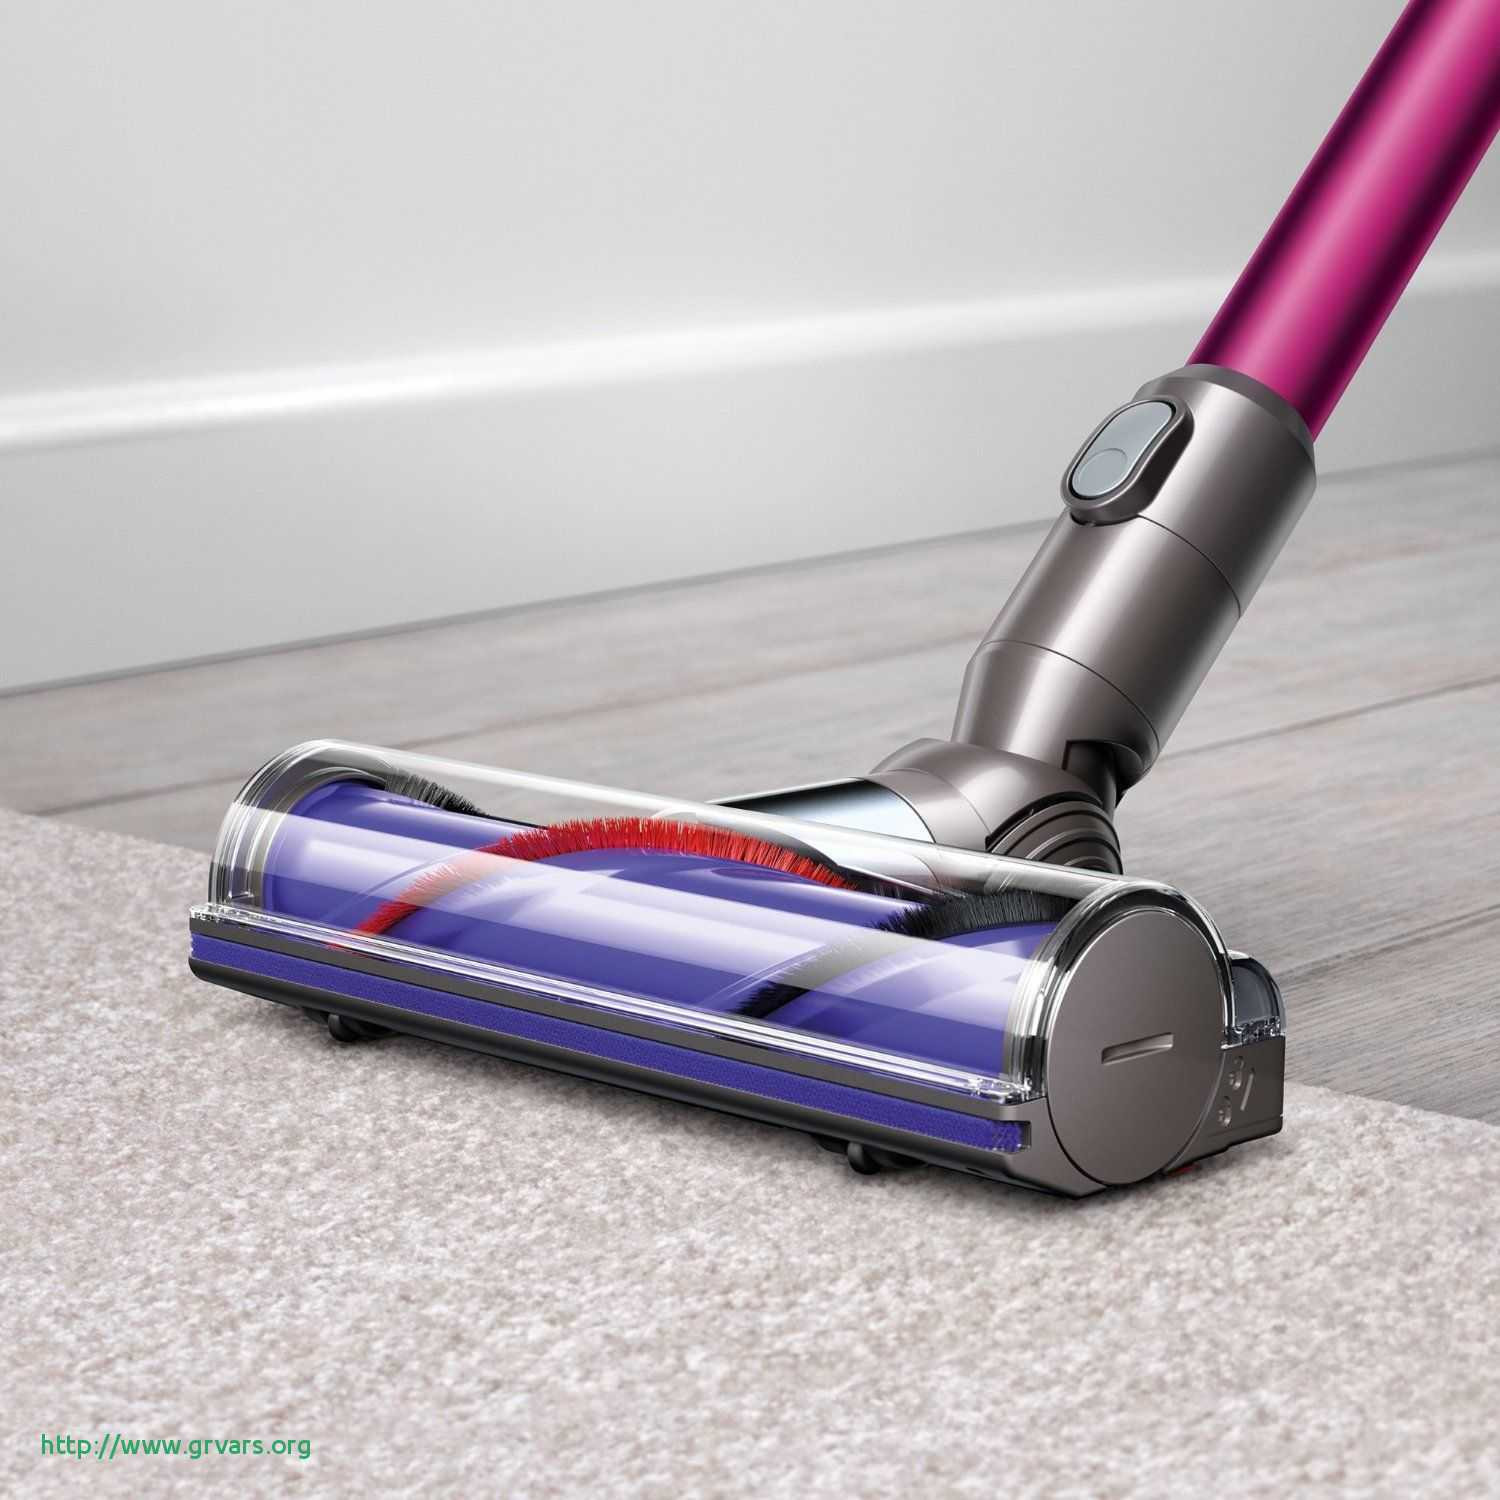 best shark vacuum for pet hair and hardwood floors of 16 luxe good vacuum for carpet and hardwood floor ideas blog pertaining to good vacuum for carpet and hardwood floor charmant 15 most useful gad s for cleaning and